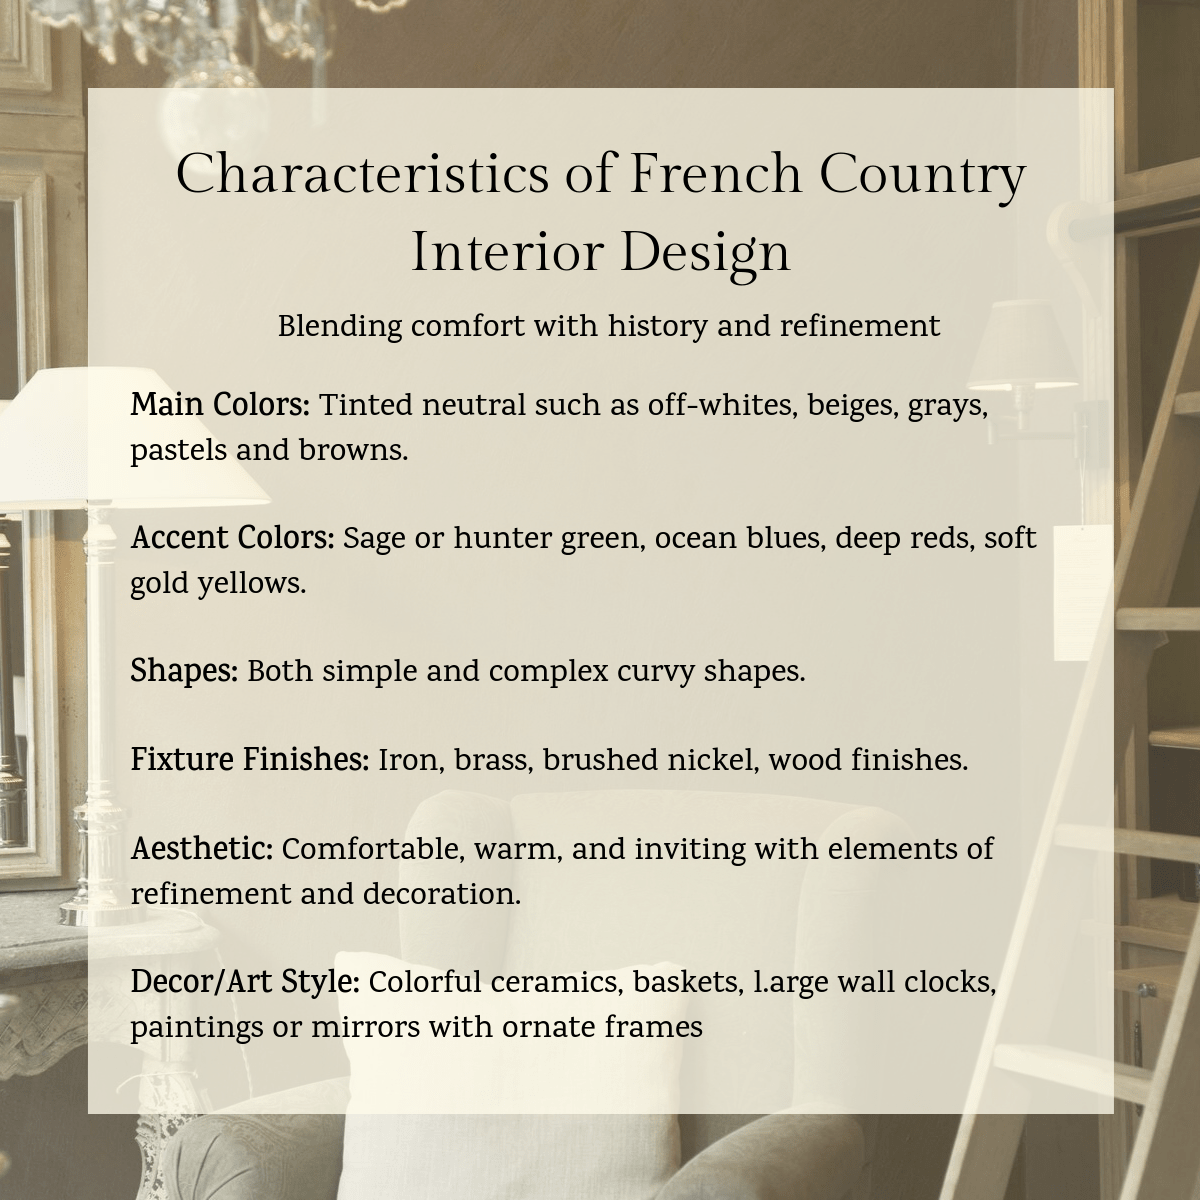 French Country interior design characteristics